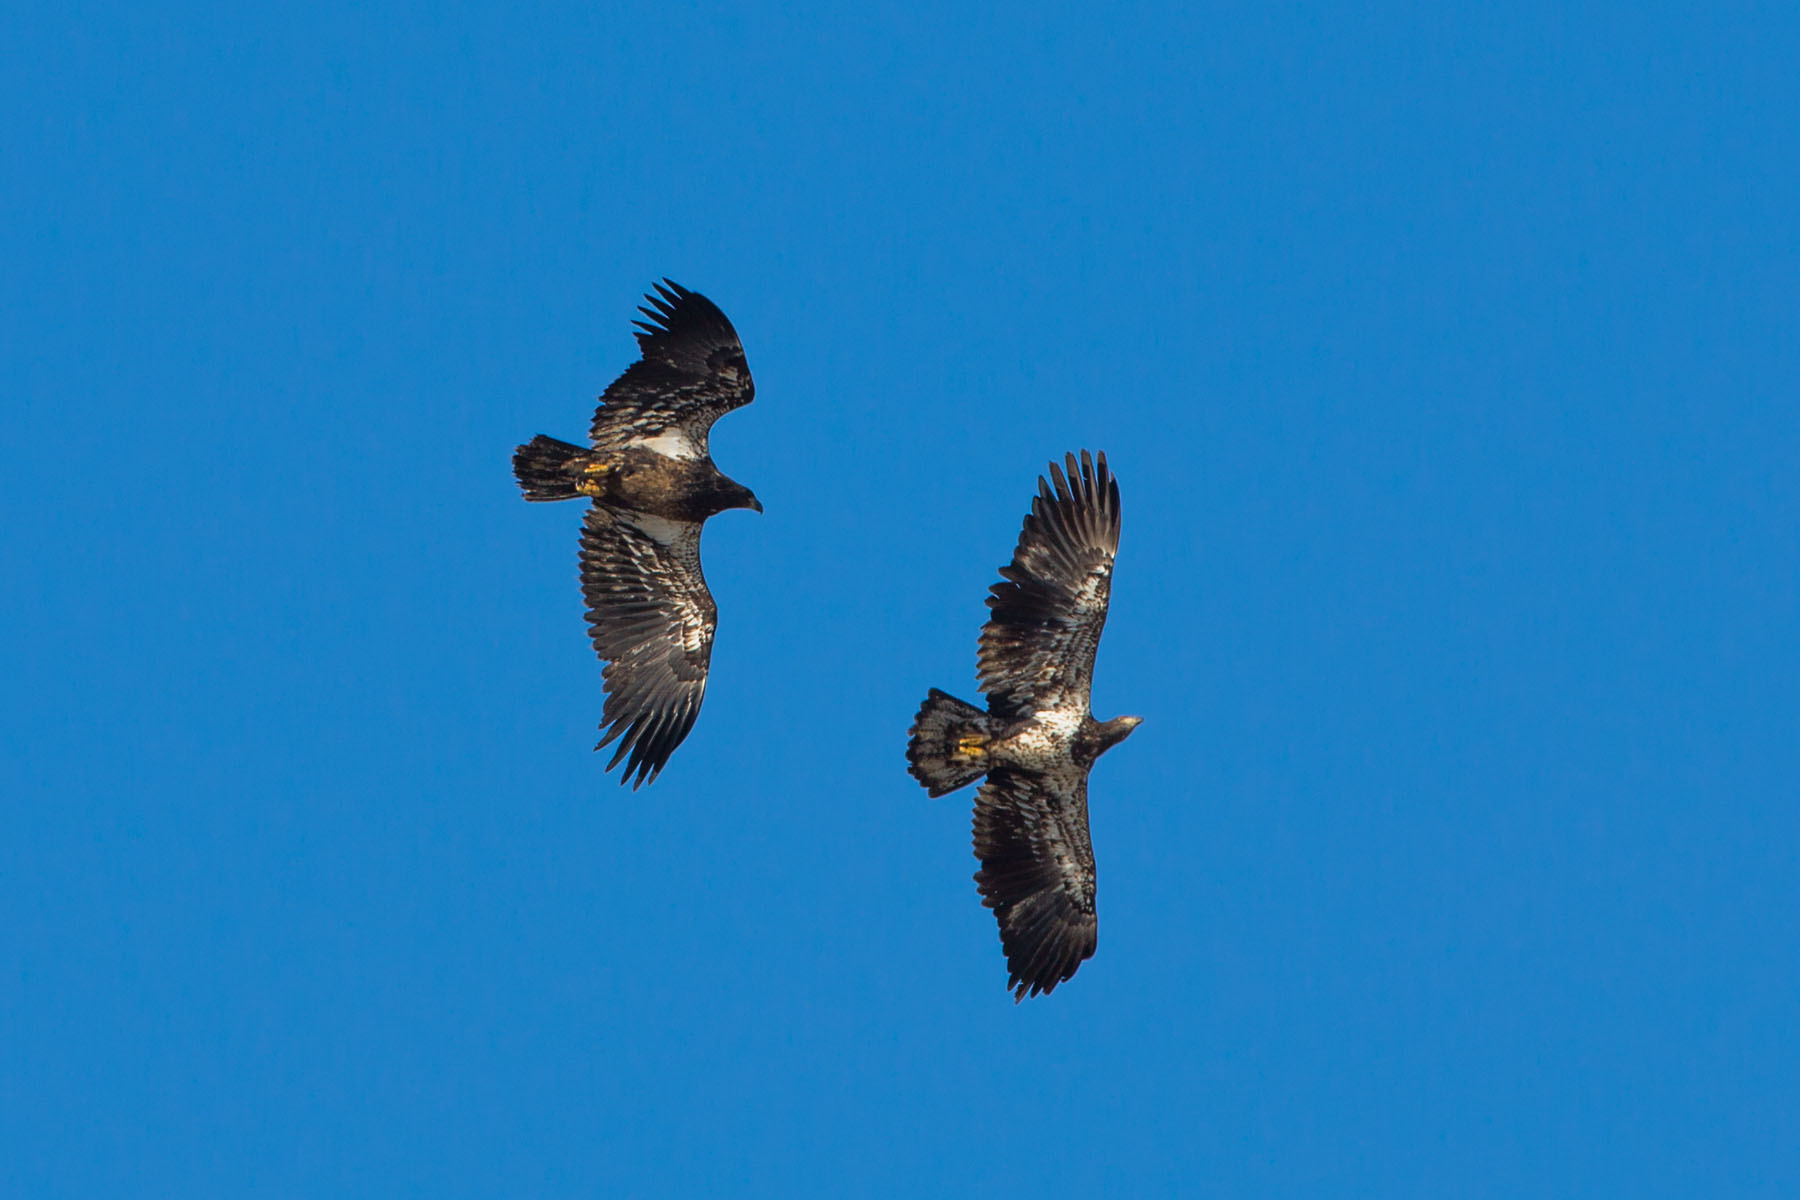 Juvenile Bald Eagles sparring, Loess Bluffs NWR, December 2019.  Click for next photo.